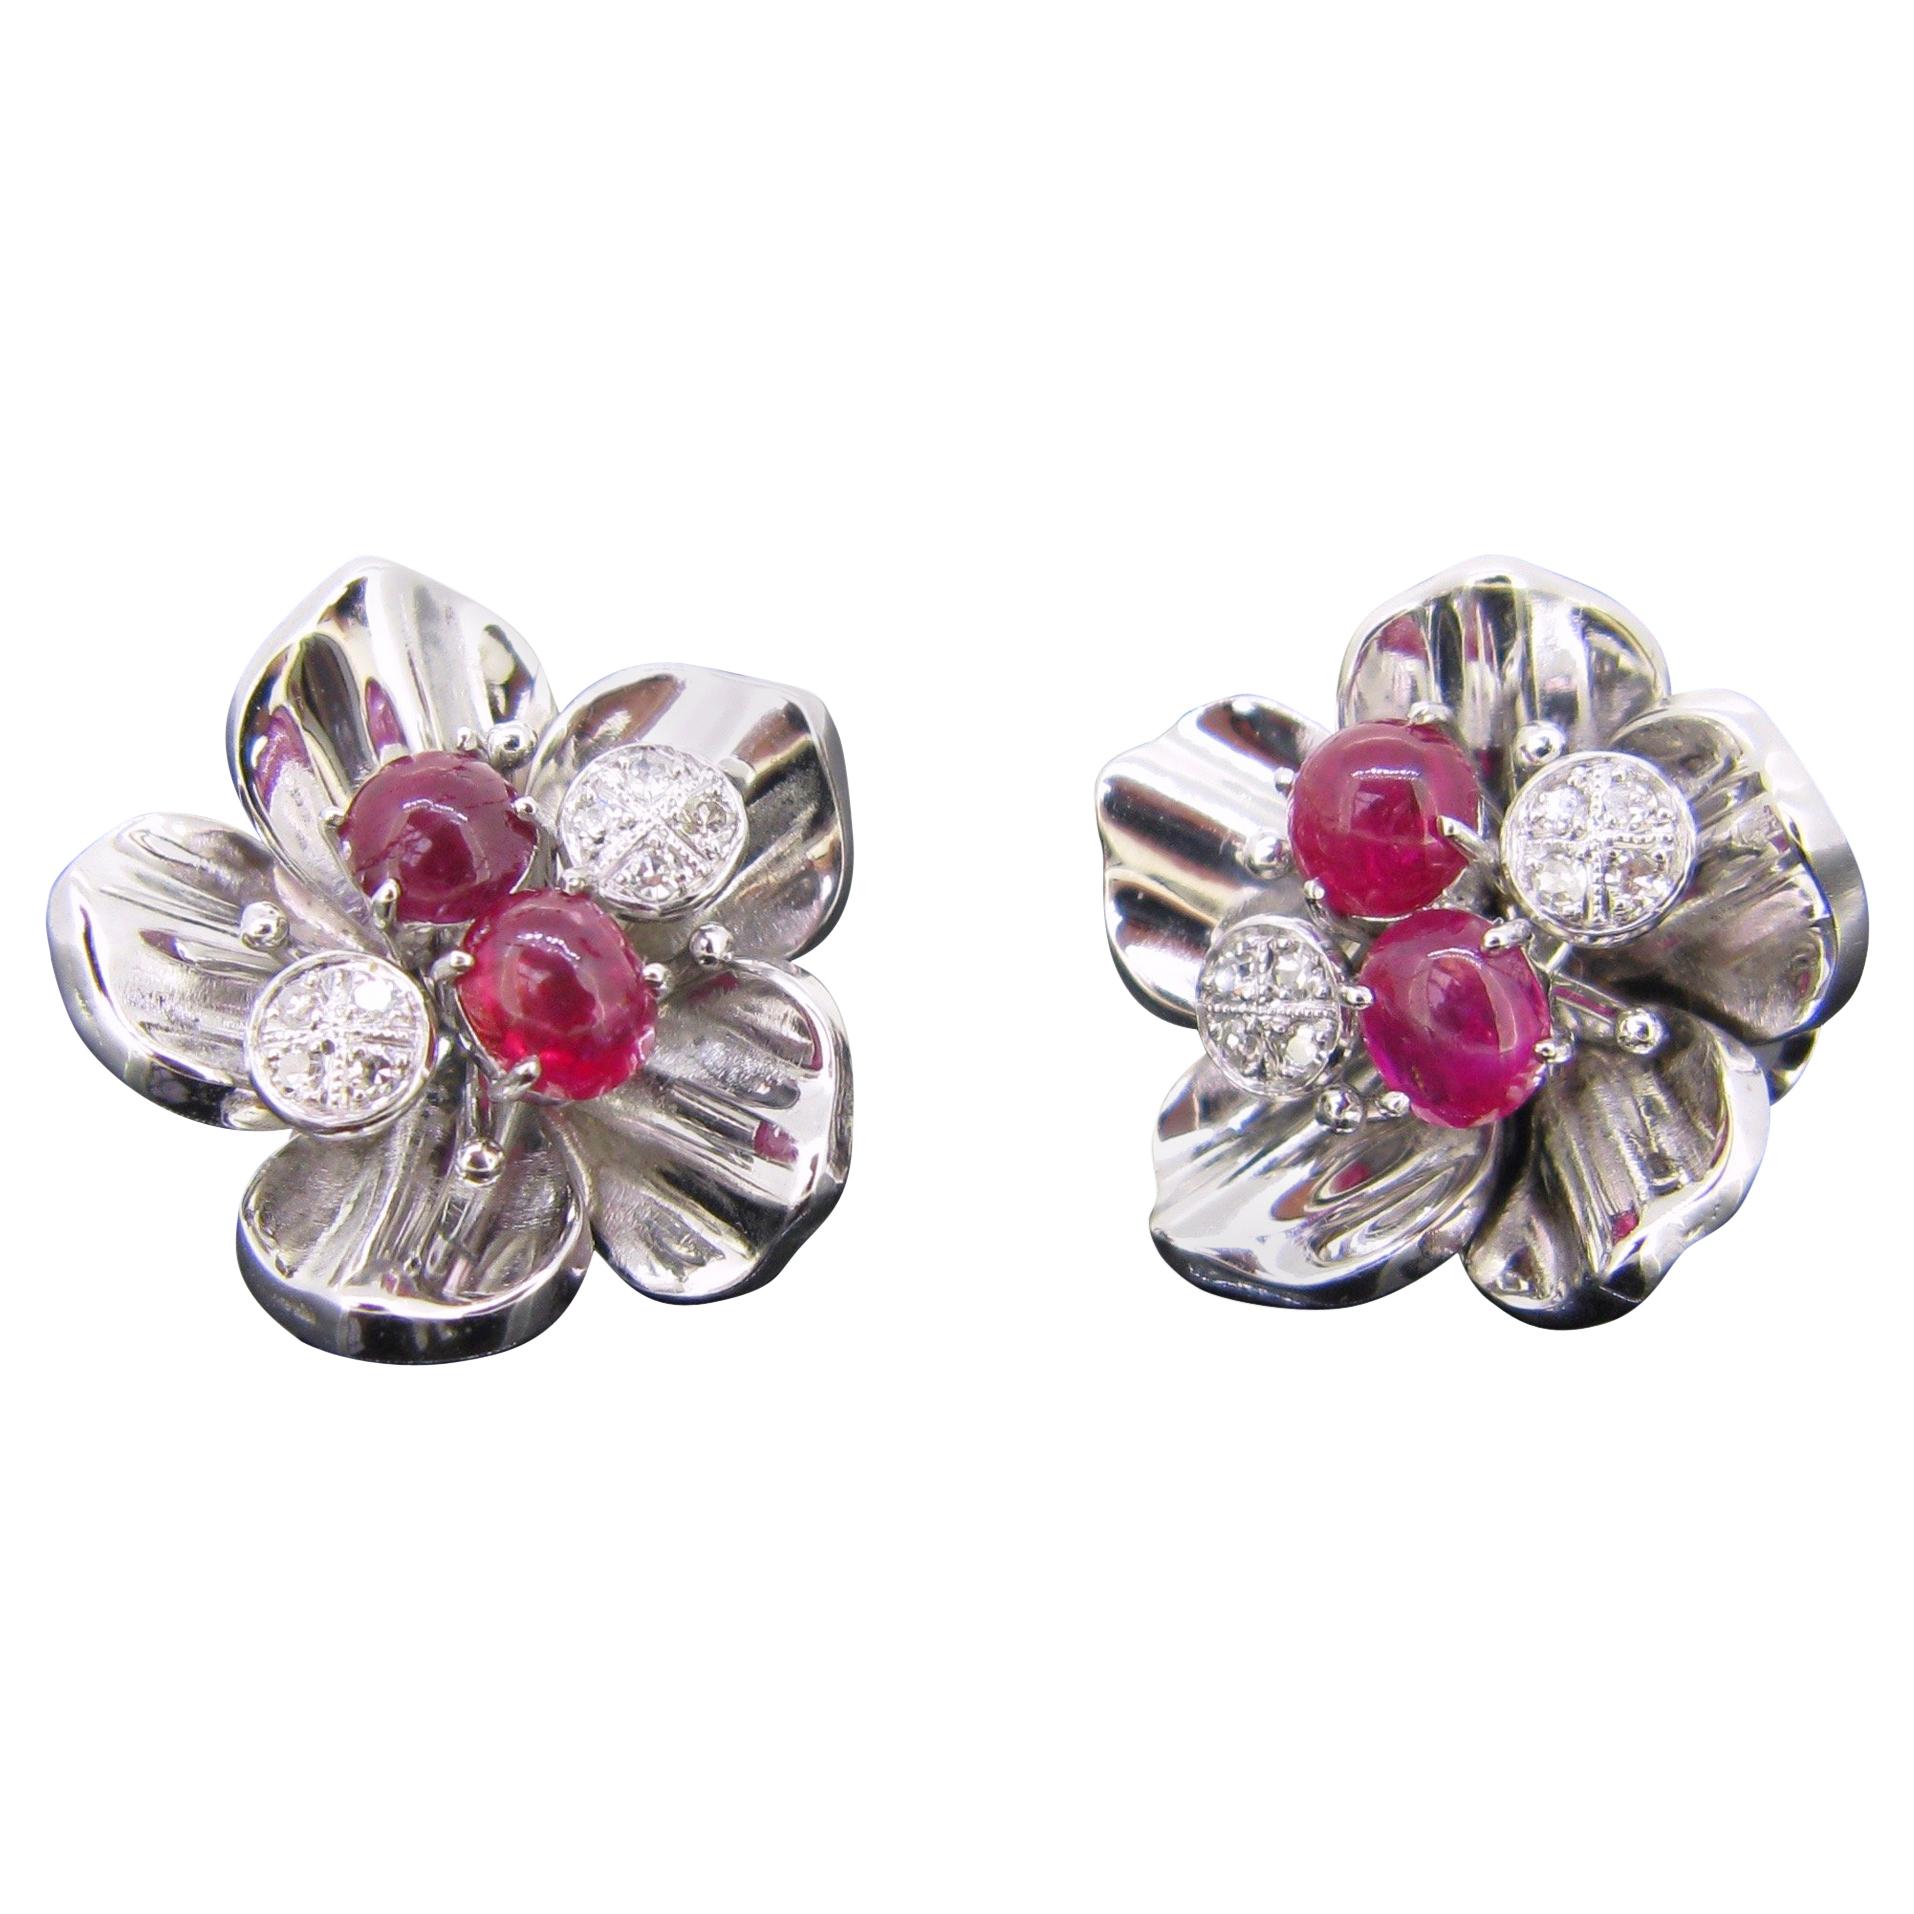 Retro Cabochon Rubies and Diamonds White Gold Flowers Earrings Clips